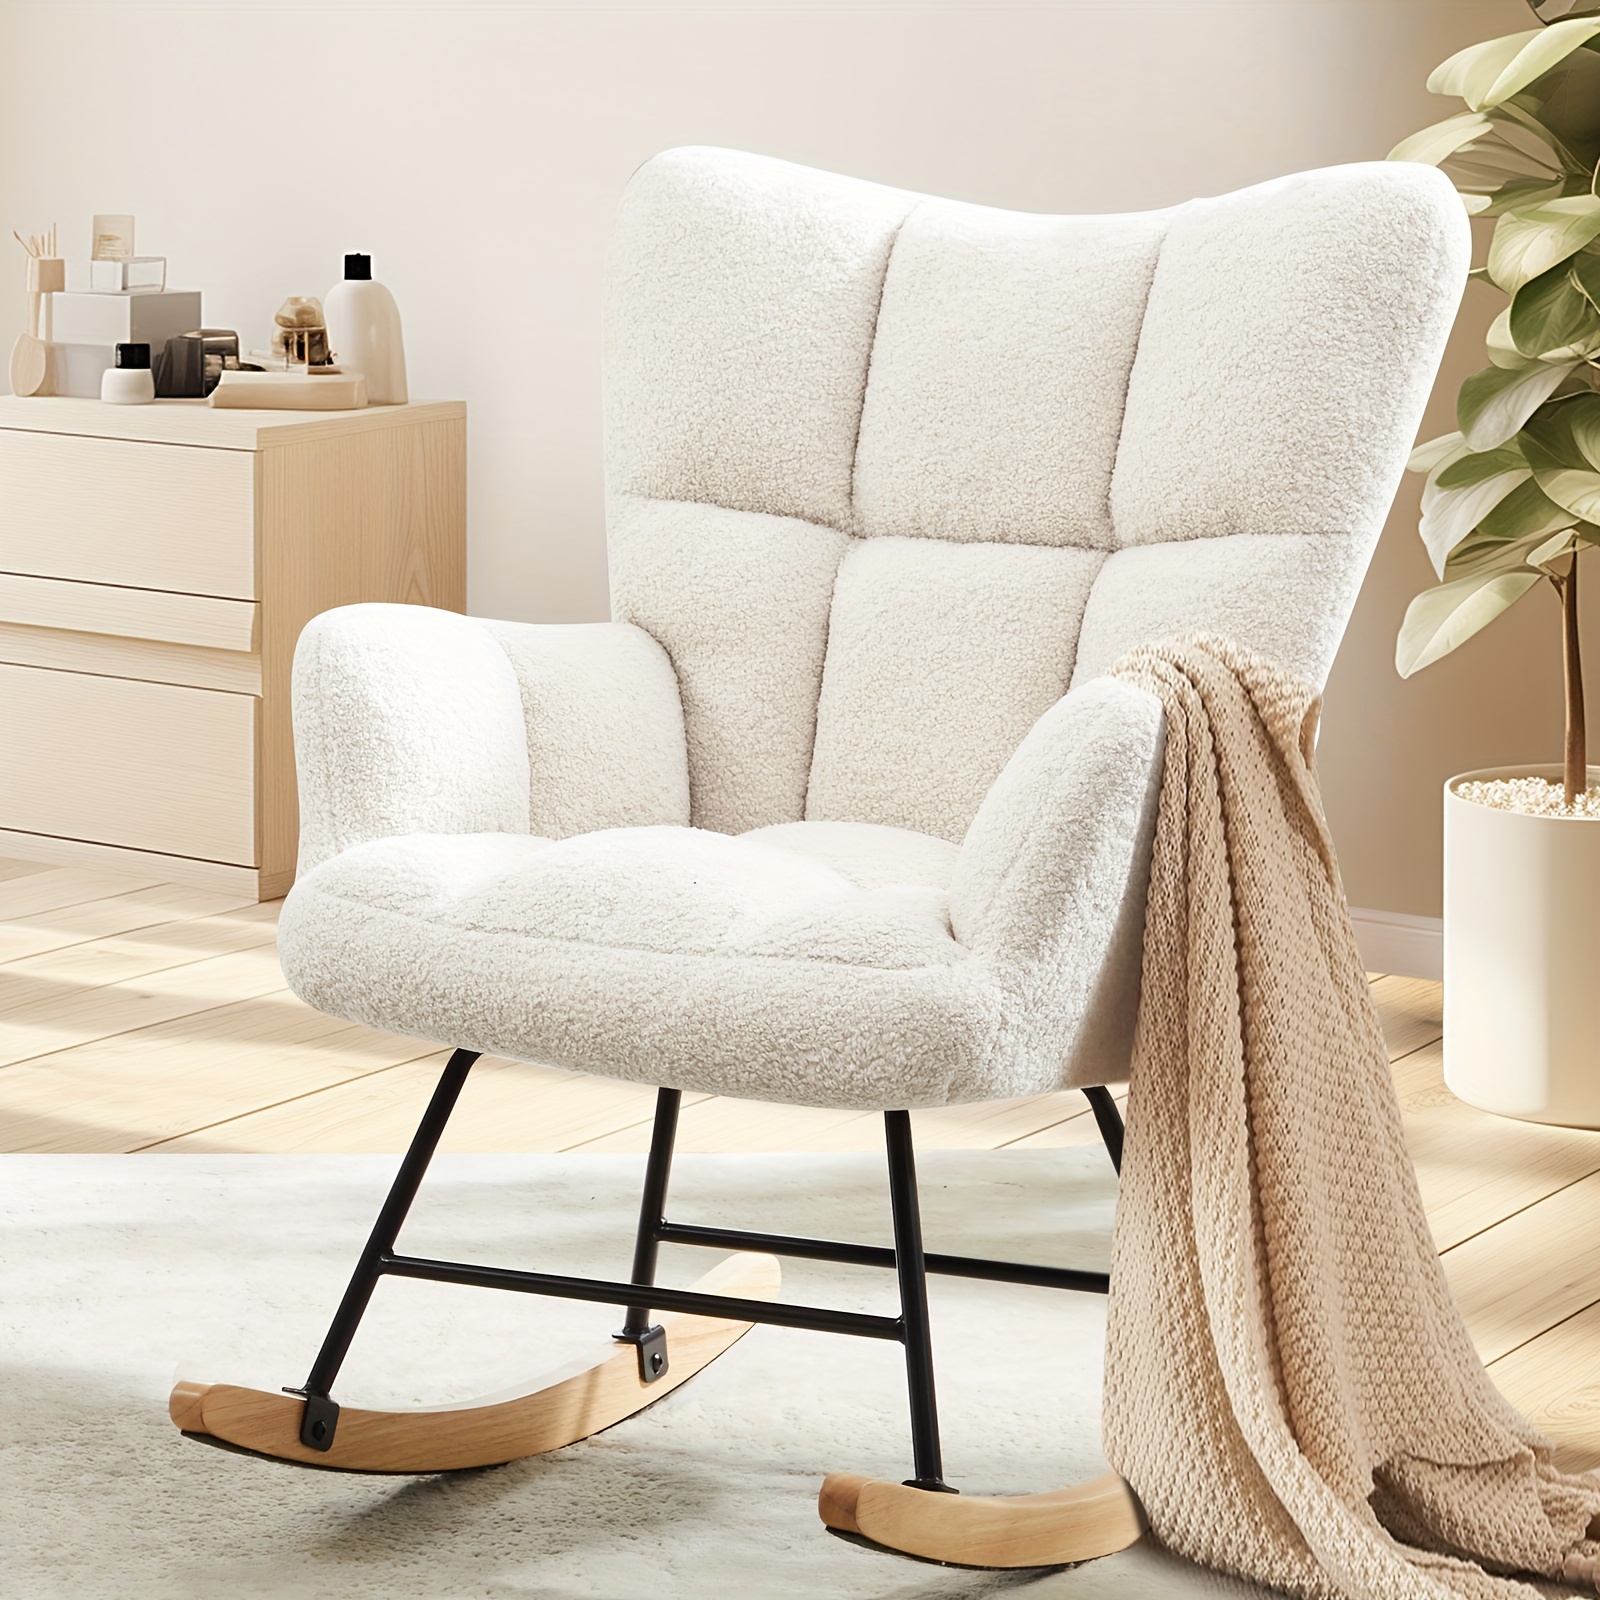 

Rocking Chair Nursery, Teddy Upholstered Glider Rocker With High Backrest, Reading Chair Modern Rocking Accent Chairs Glider Recliner For Living Room